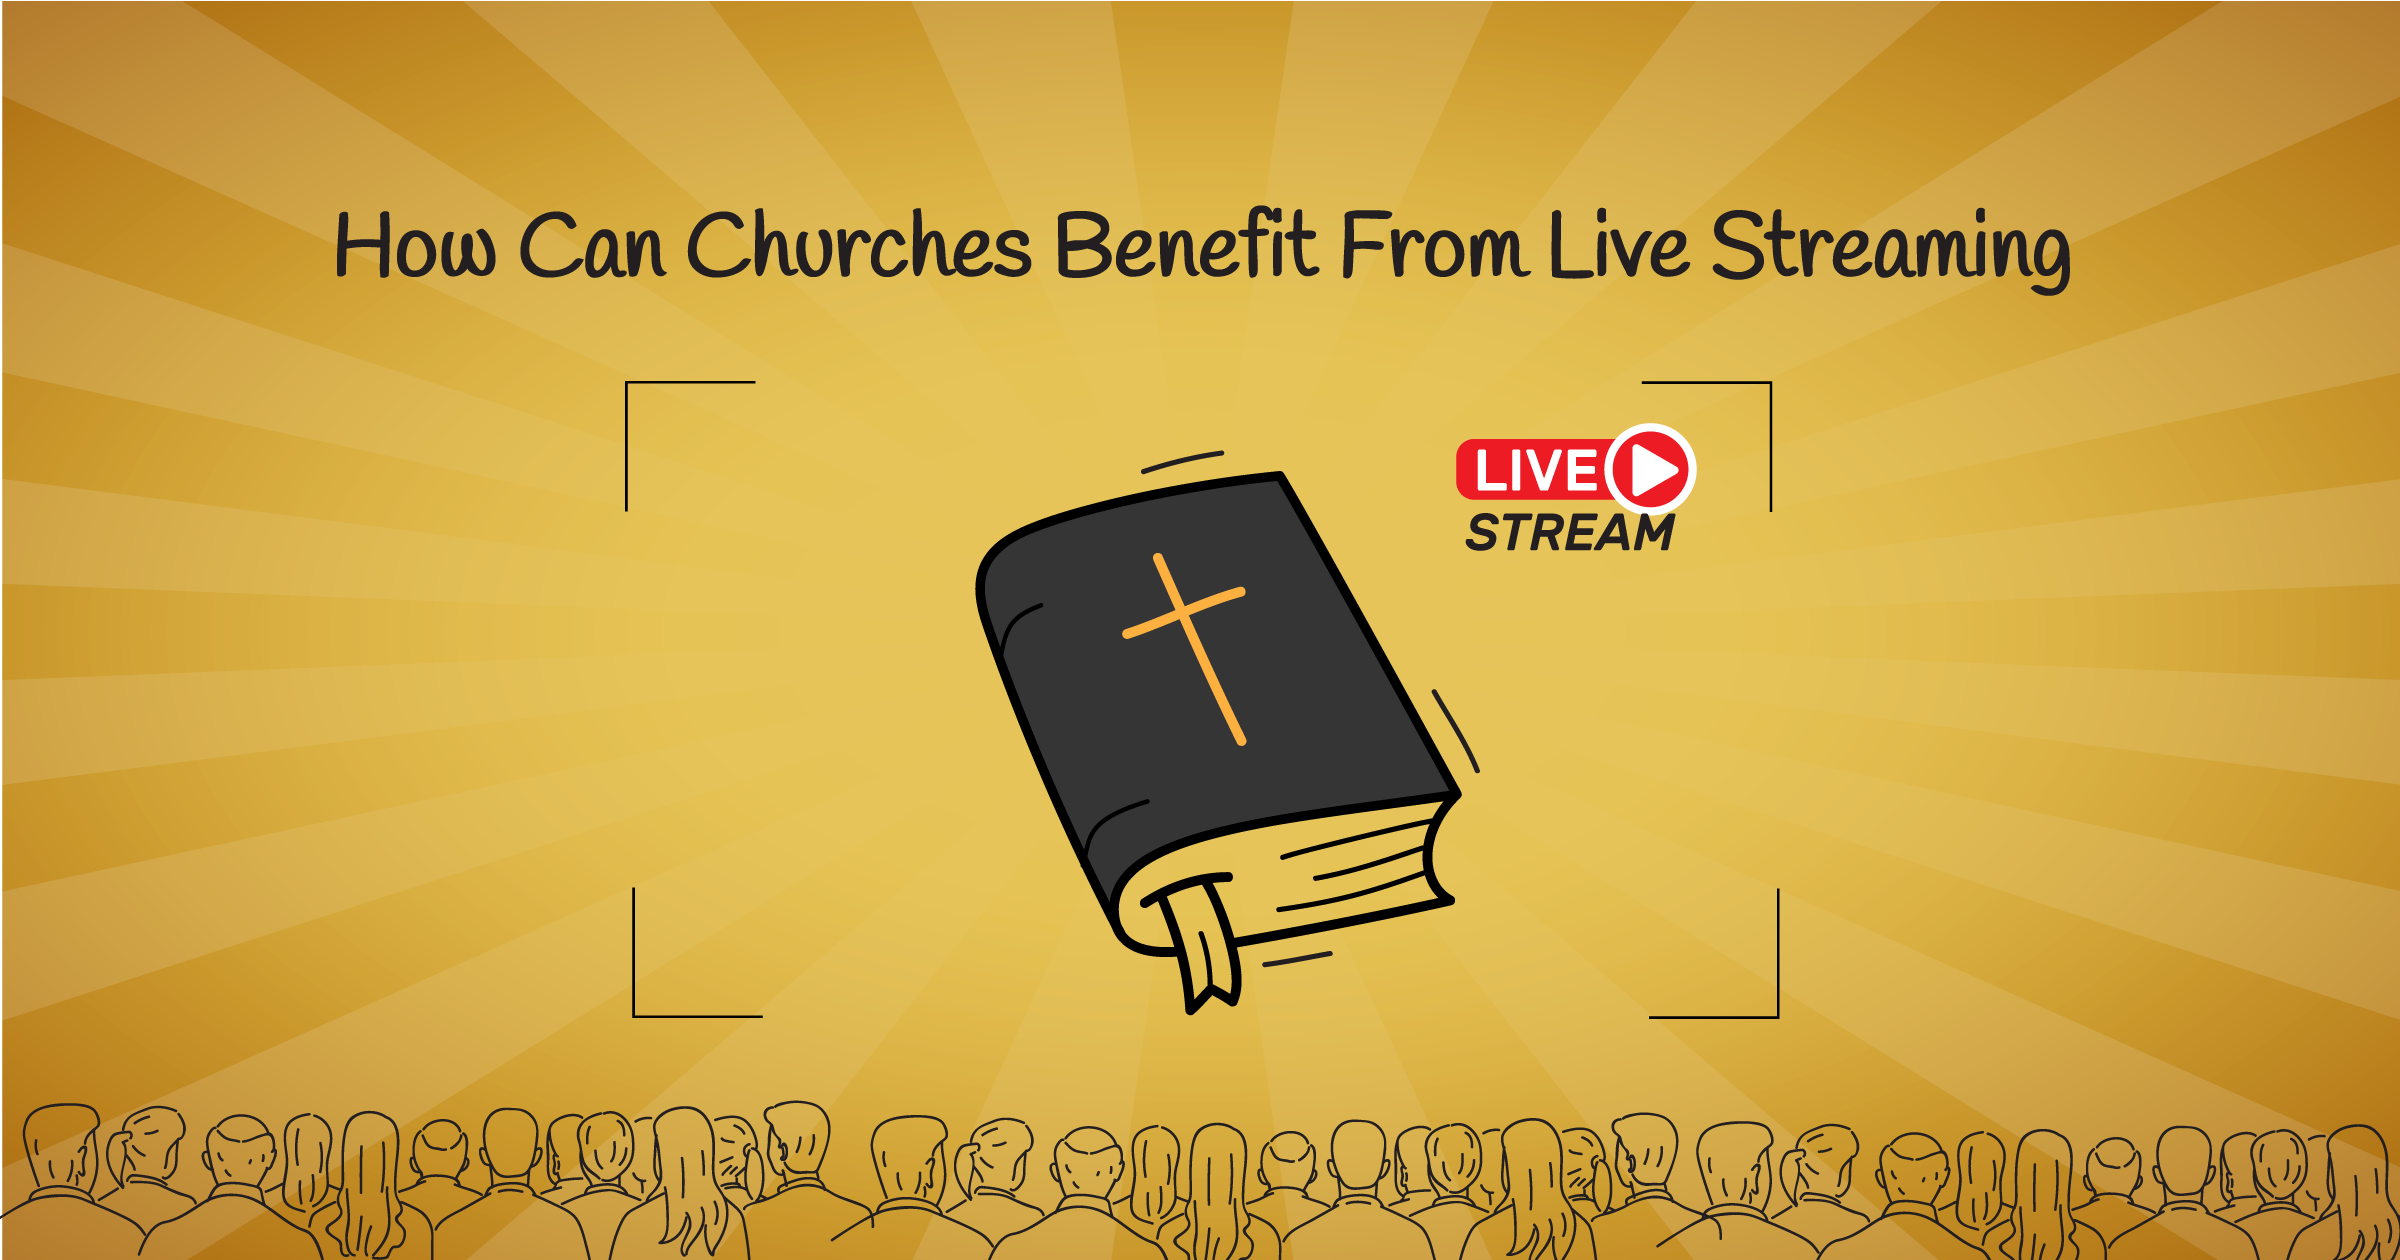 Live streaming church services